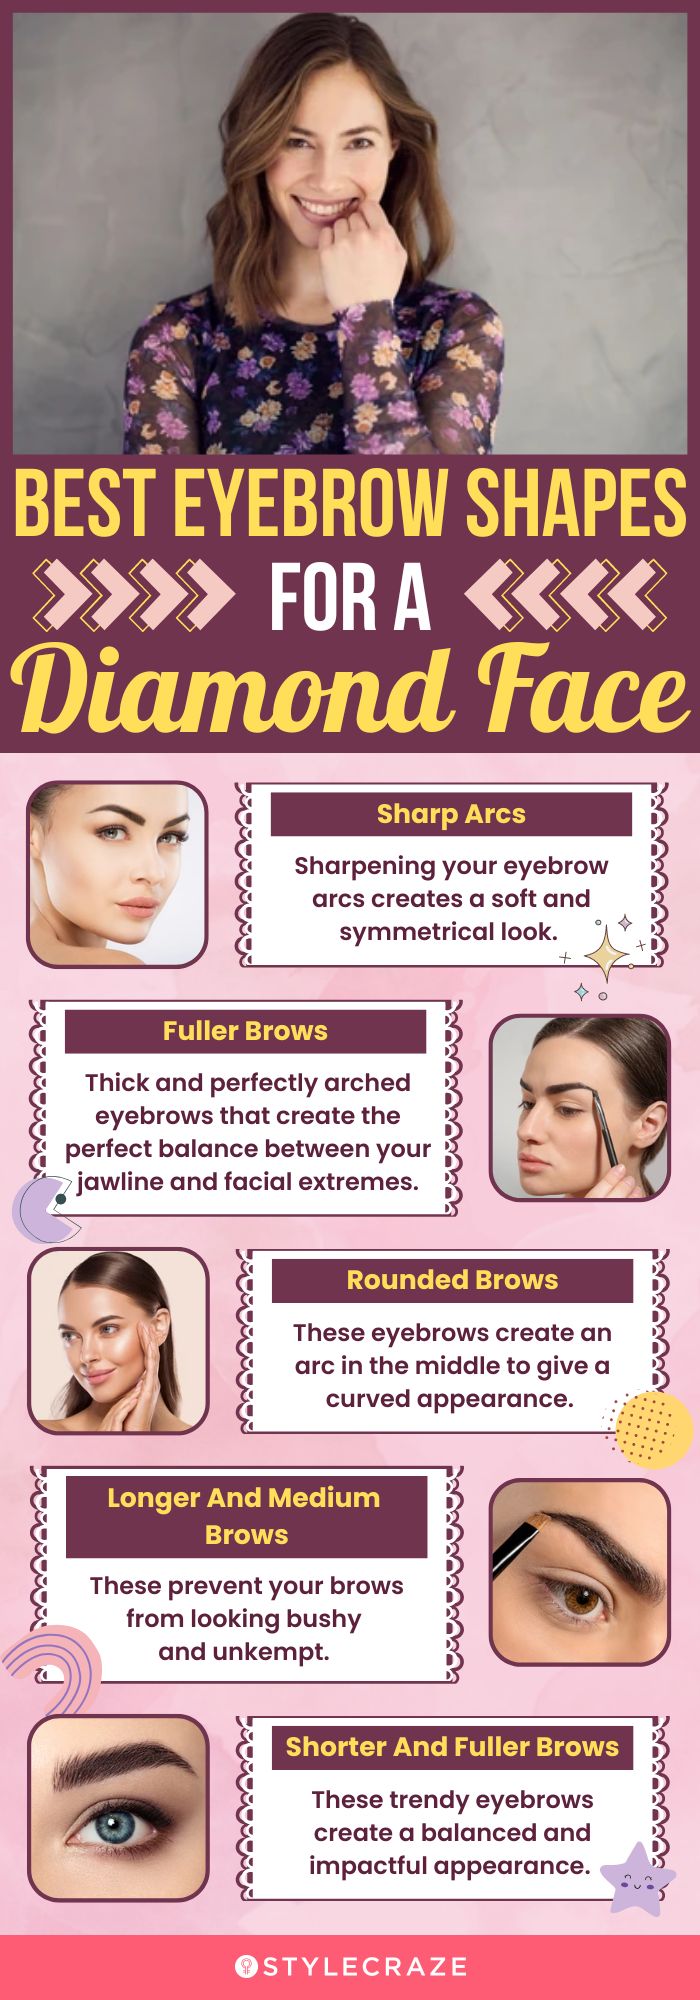 best eyebrow shapes for a diamond face (infographic)